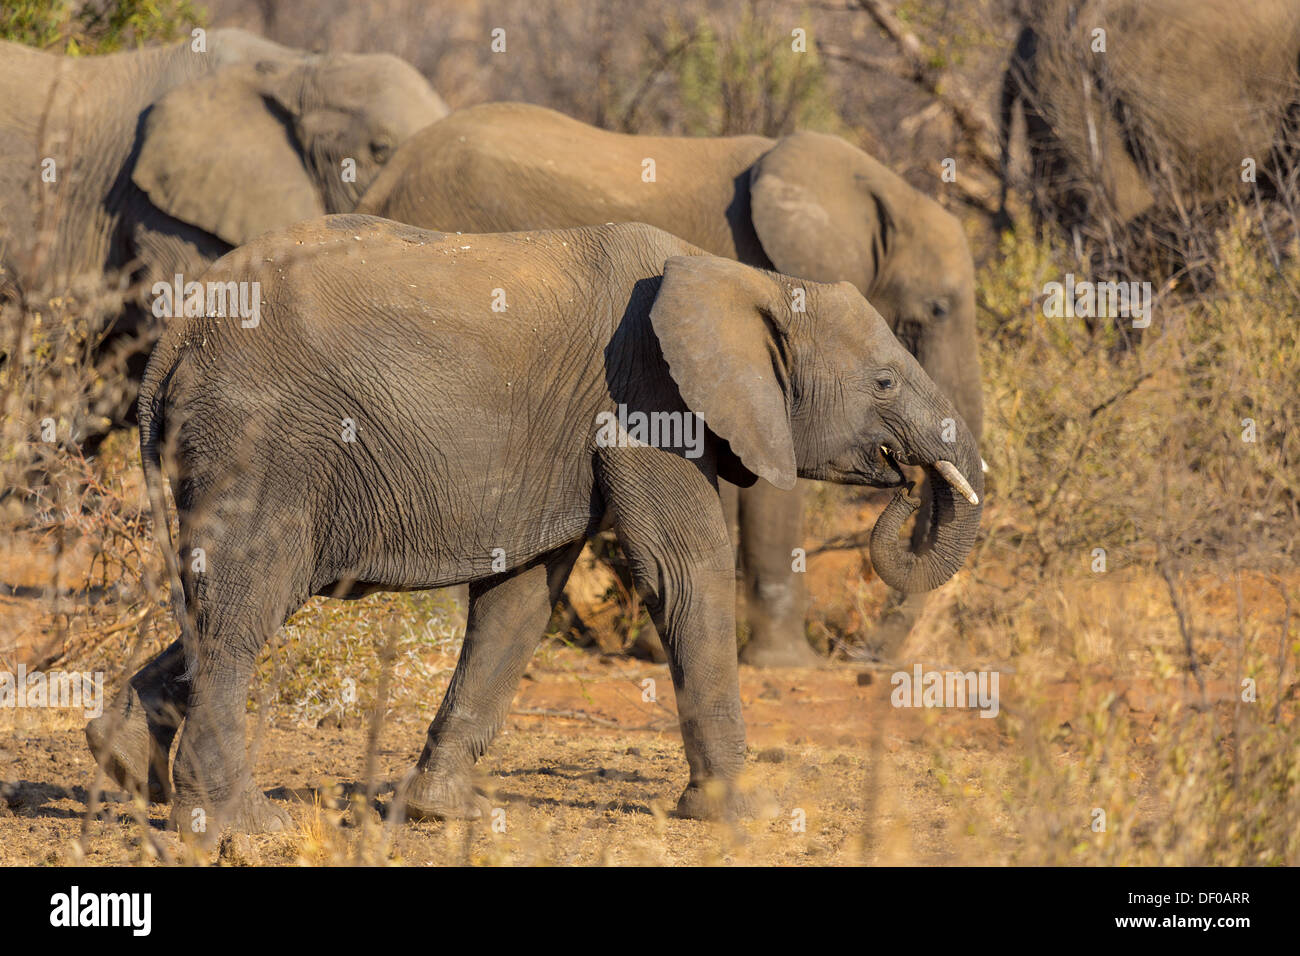 A small elephant herd wandering in the grasslands of South Africa's Pilanesberg National Park Stock Photo